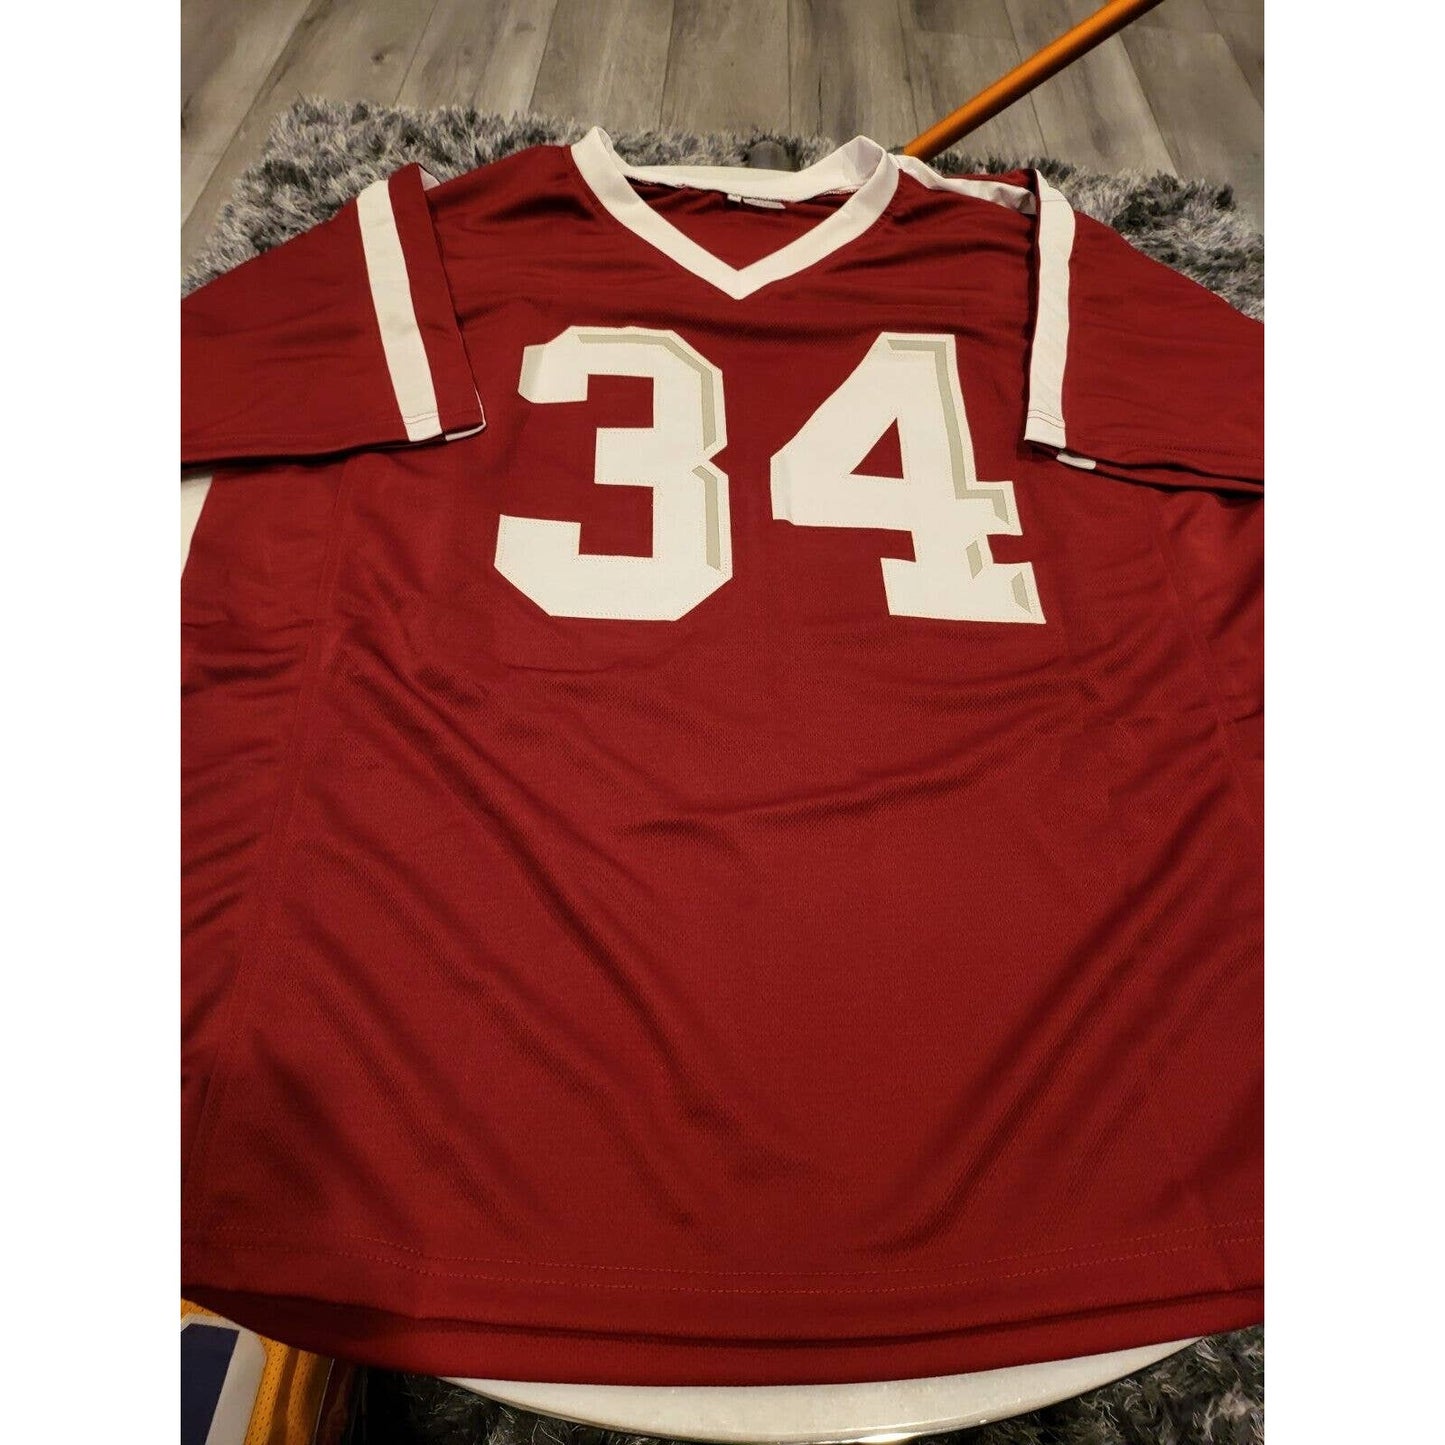 Dante Hall Autographed/Signed Jersey PSA/DNA COA Texas A&M Aggies Chiefs - TreasuresEvolved